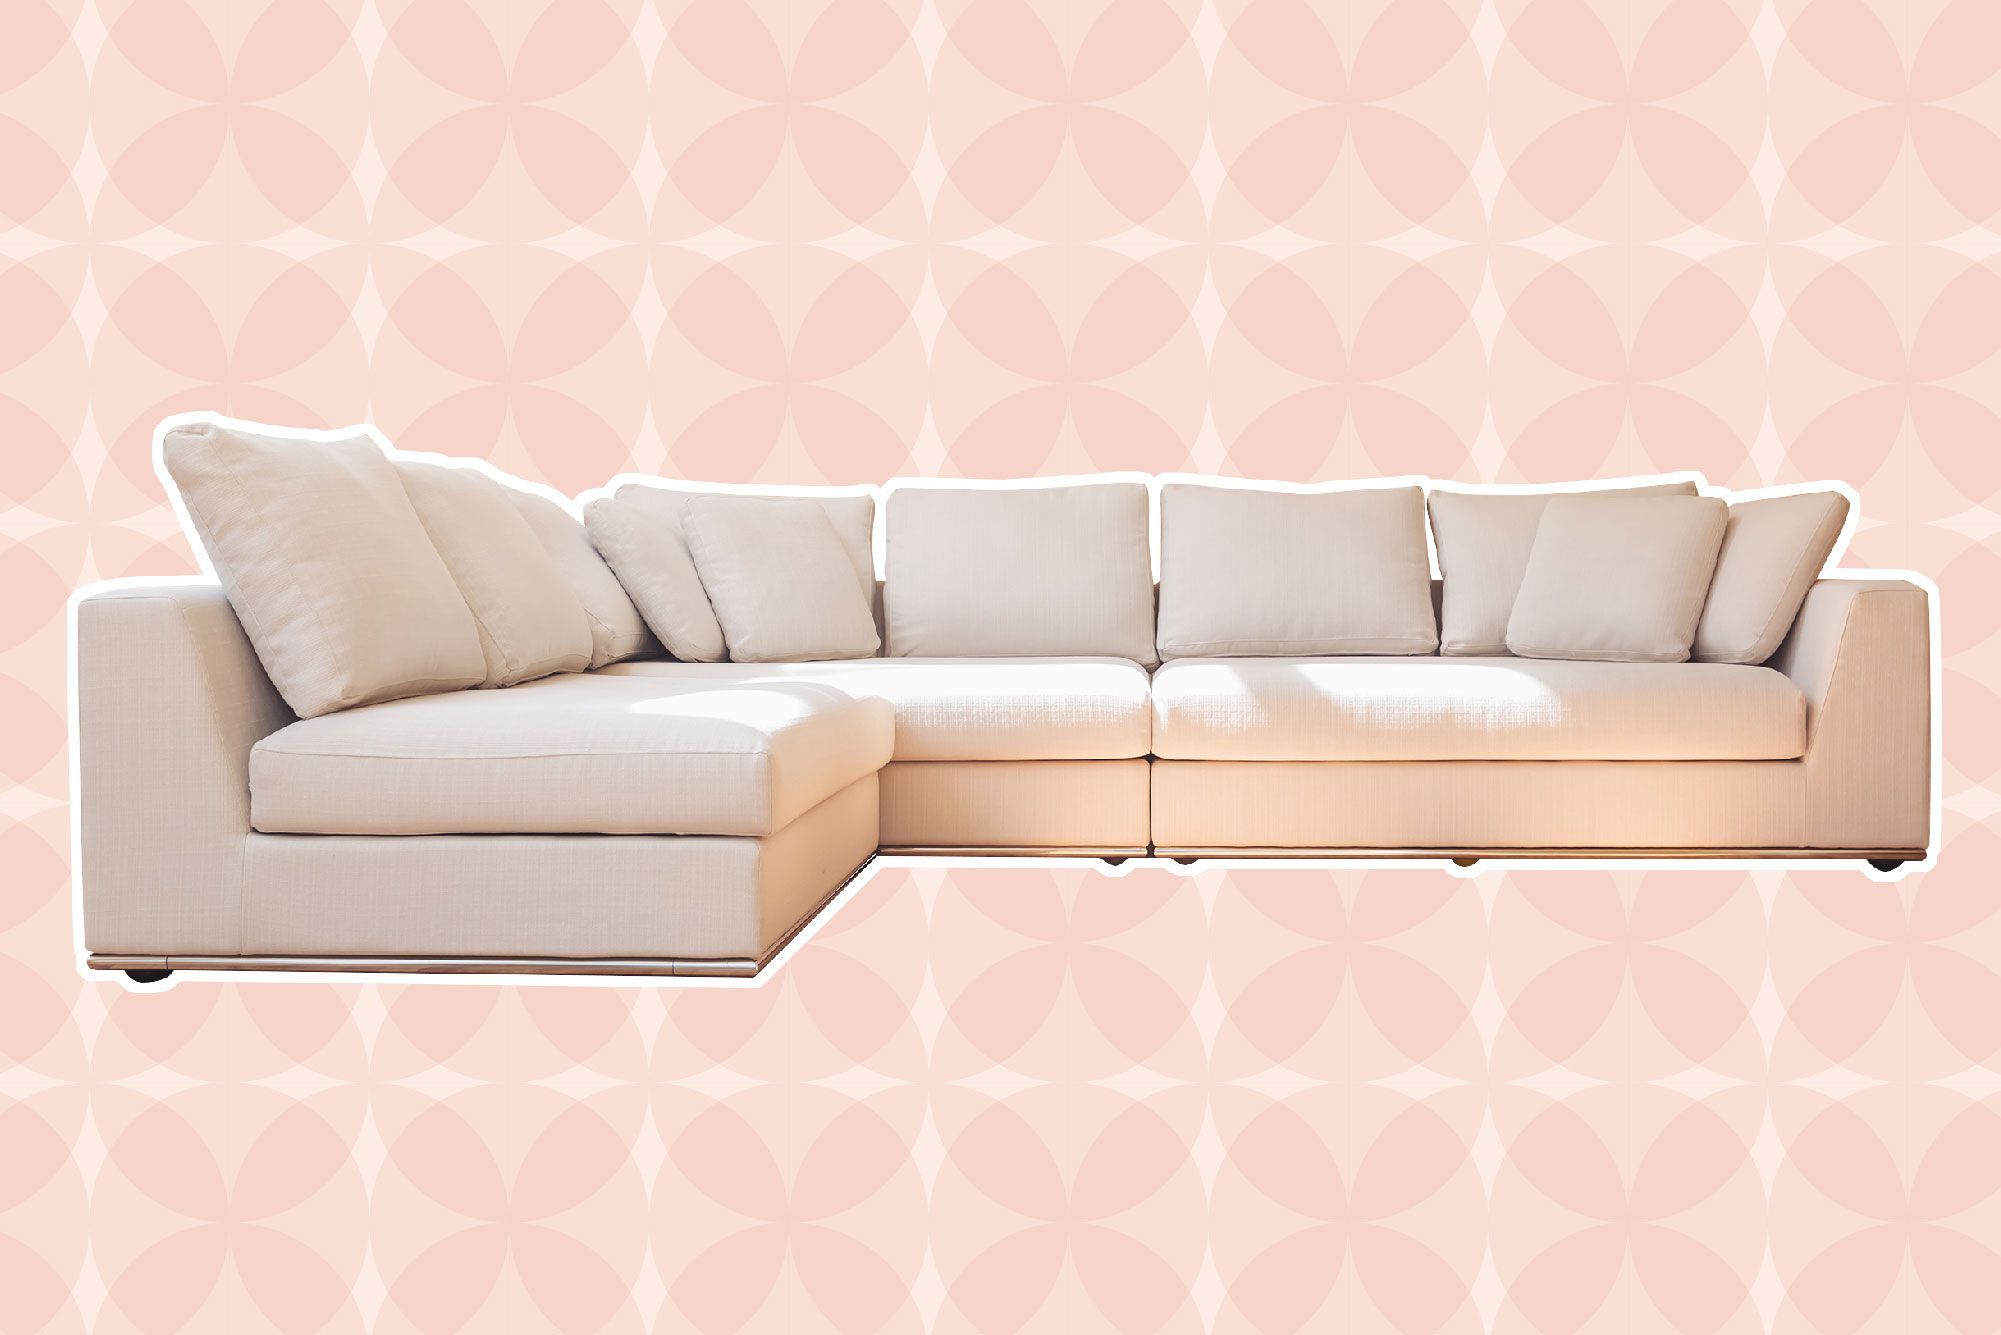 The 11 Best Sectional Sofas Of 2023, Testedus Inside Sectional Sofas With Ottomans And Tufted Back Cushion (View 11 of 20)